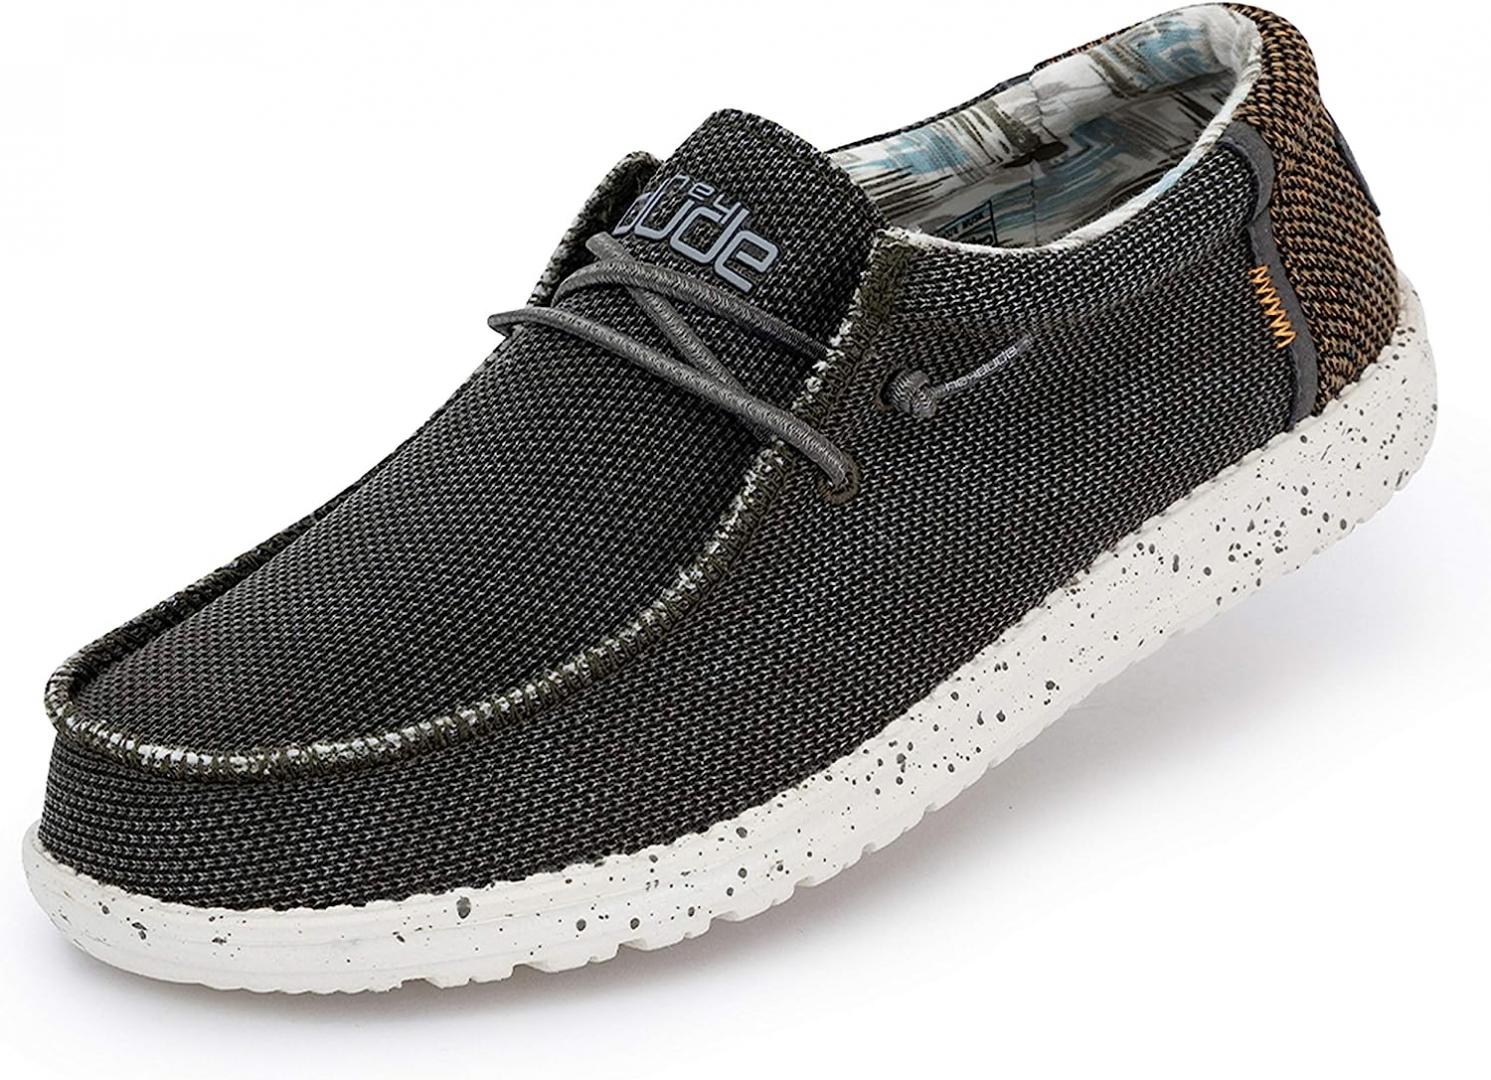 Hey Dude Men's Wally Kite Various Sizes and Colors | Men’s Shoes | Men's Lace-Up Loafers | Lightweight and Comfortable